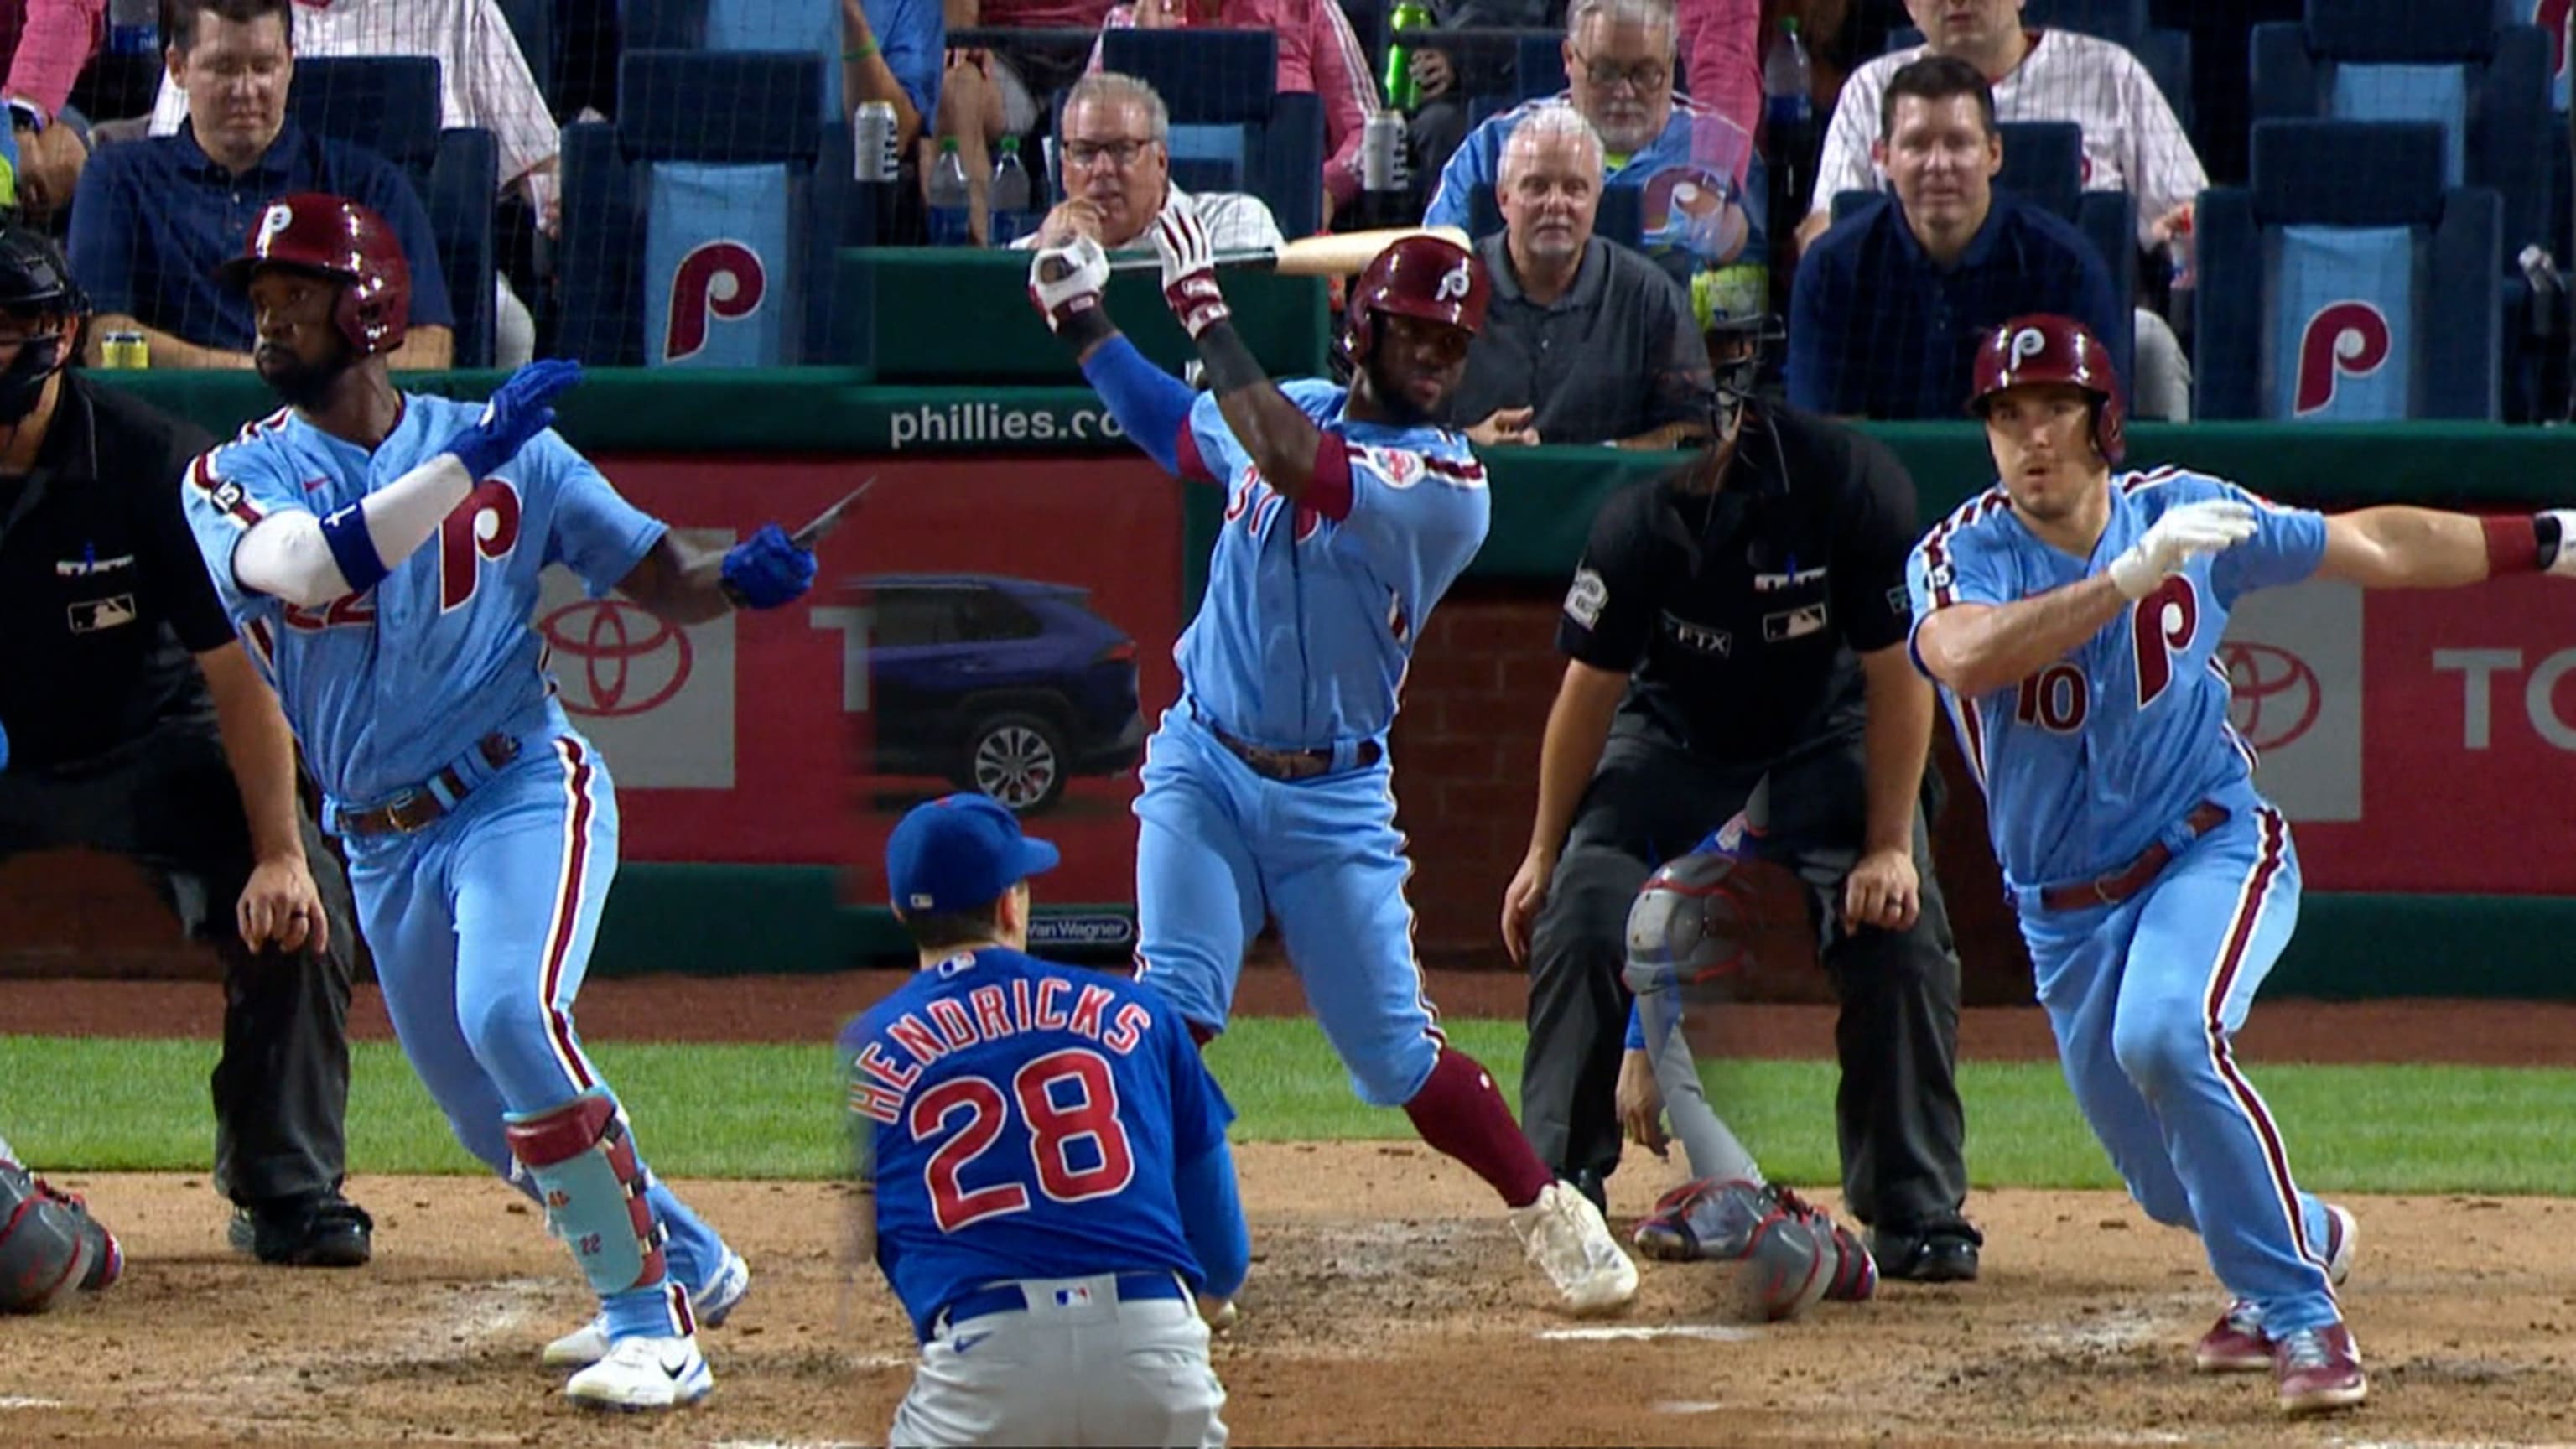 Bryce Harper's walkoff grand slam lifts Phillies over Cubs - The